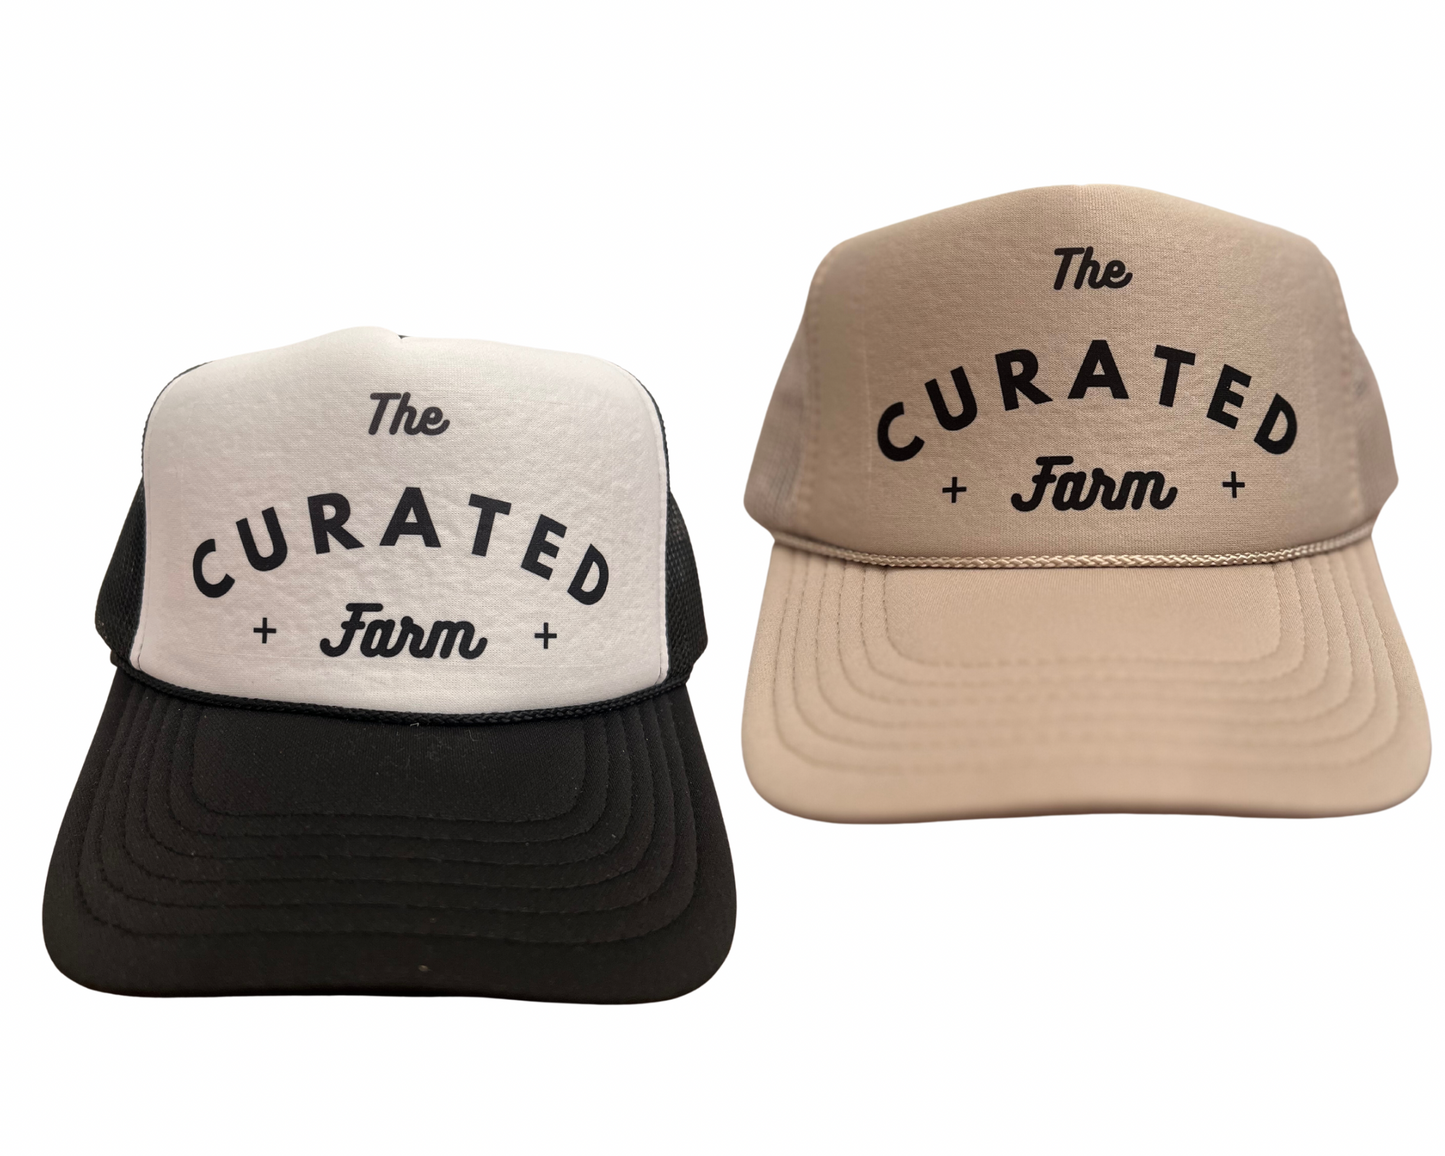 The Curated Farm Trucker Hat